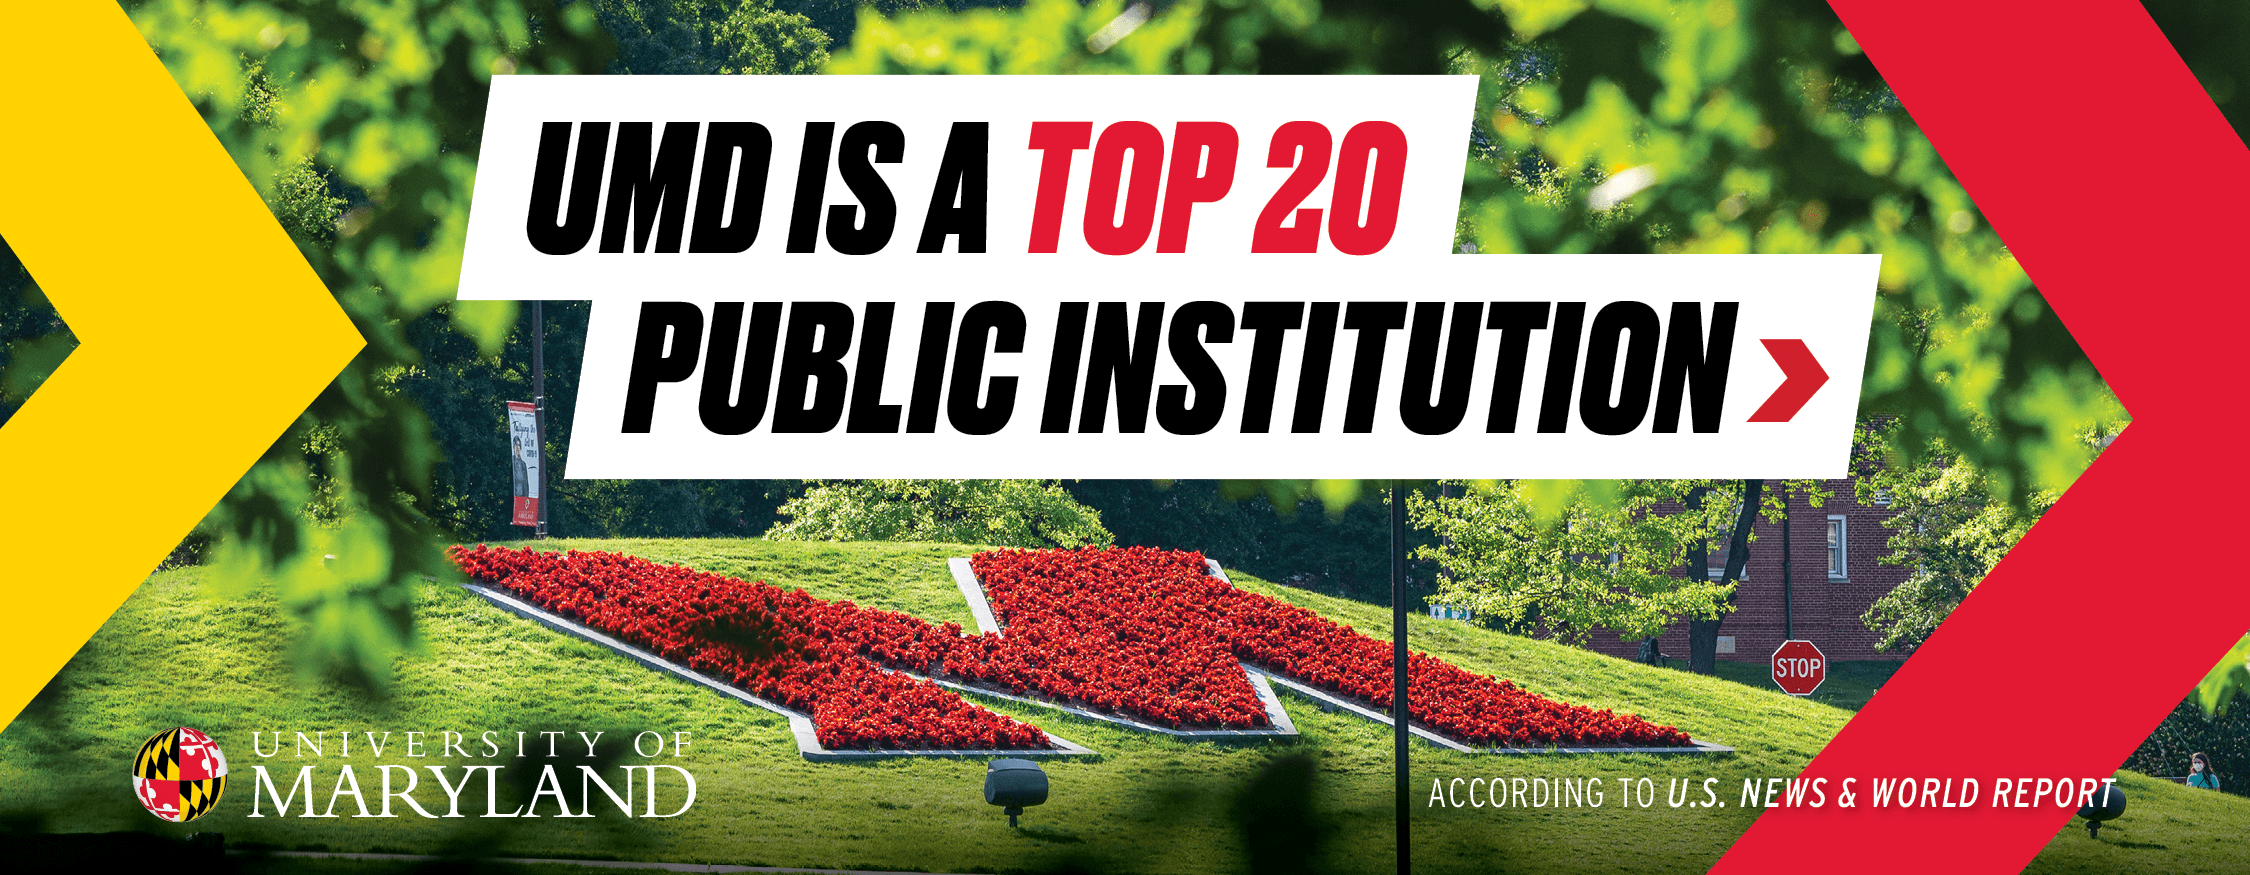 UMD is a top 20 public institution according to U.S. News & World Report